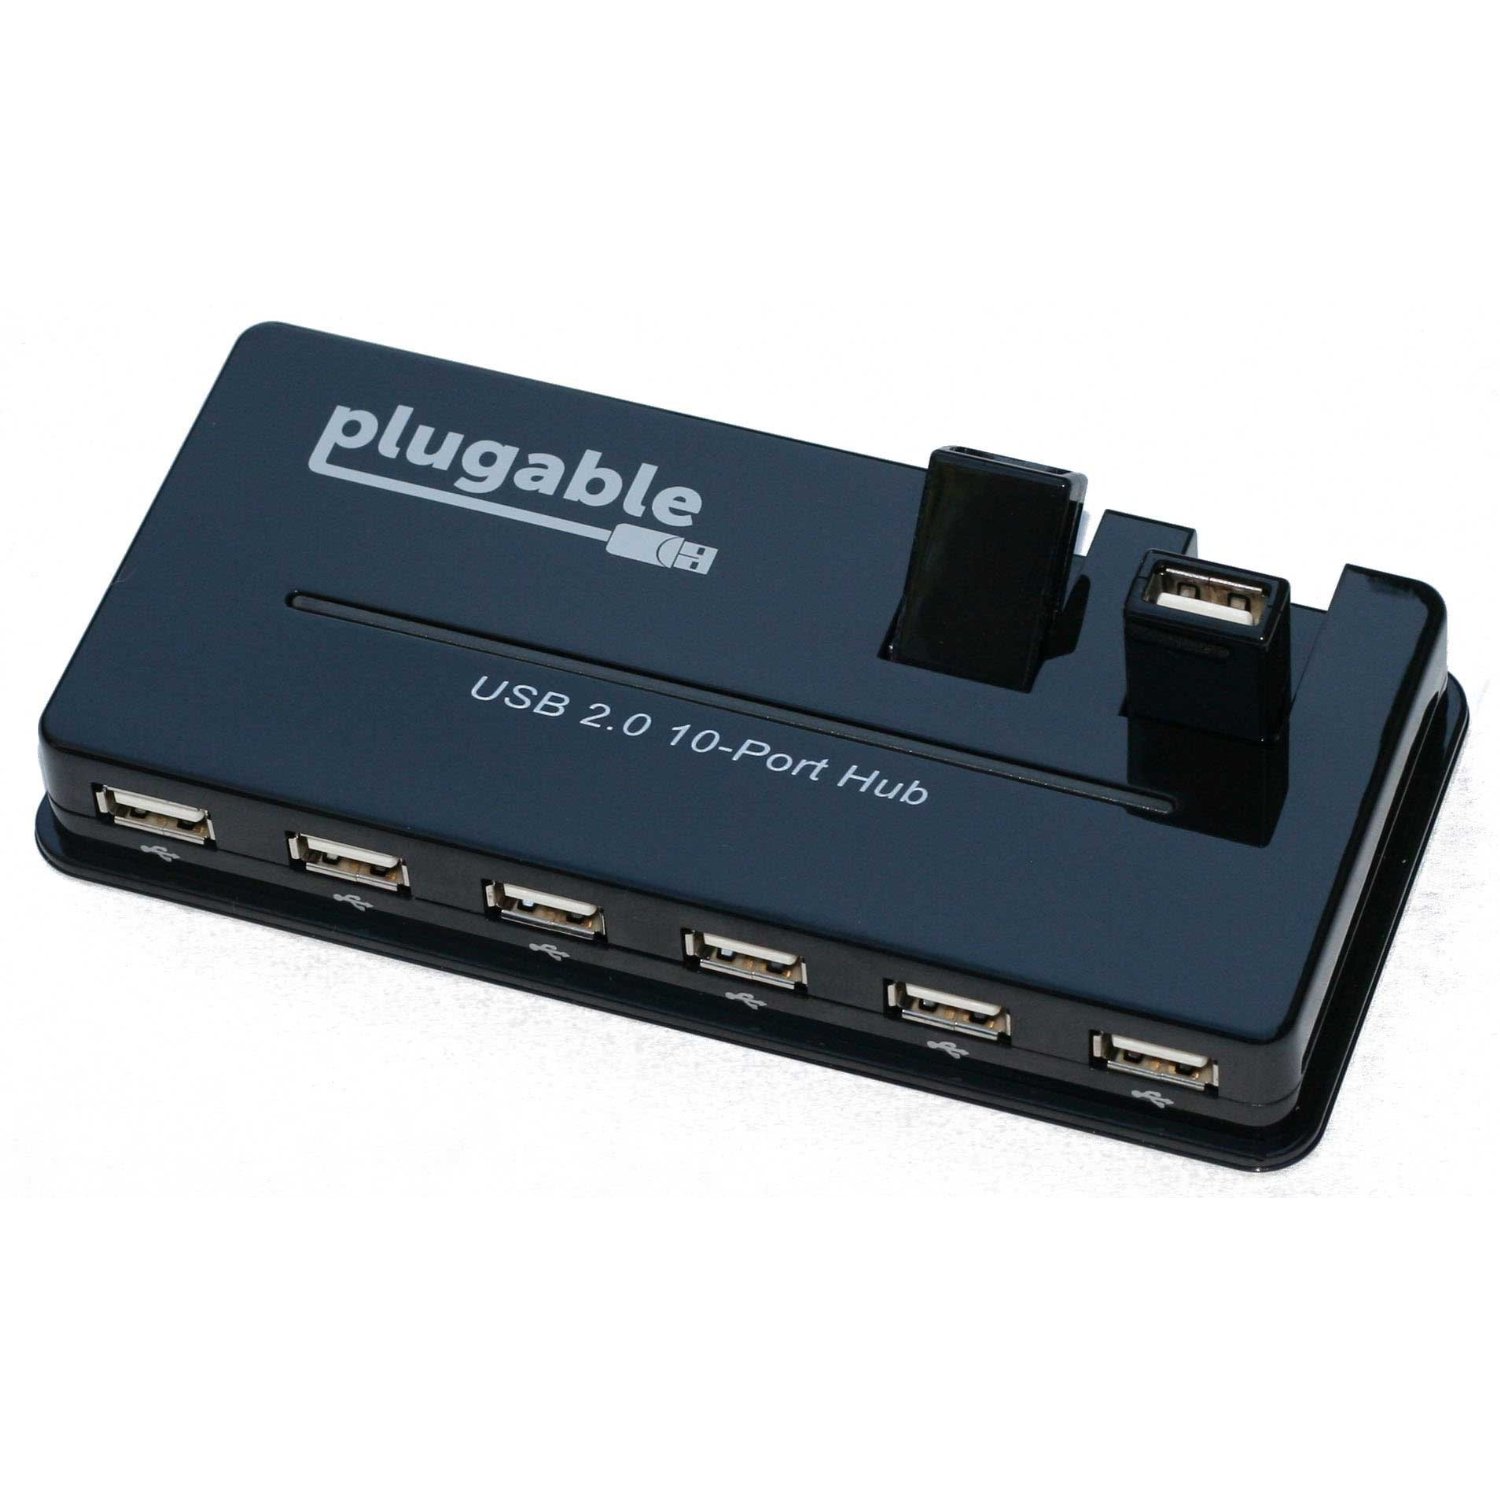 http://thetechjournal.com/wp-content/uploads/images/1201/1325695390-plugable-usb-20-10-port-hub-with-power-adapter-1.jpg